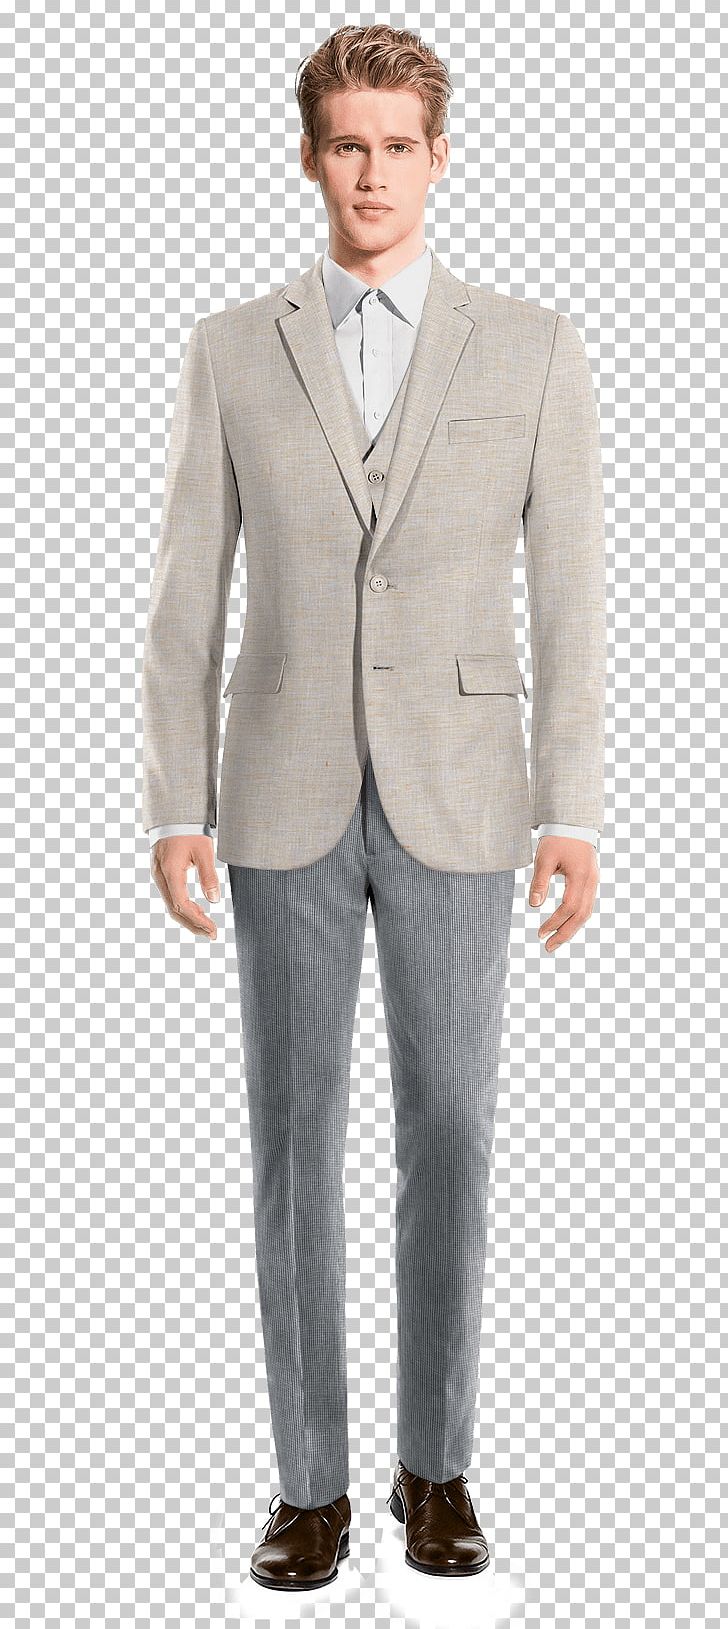 Suit Chino Cloth Pants Tweed Shoe PNG, Clipart, Blazer, Chino Cloth, Clothing, Costume, Costume Homme Free PNG Download